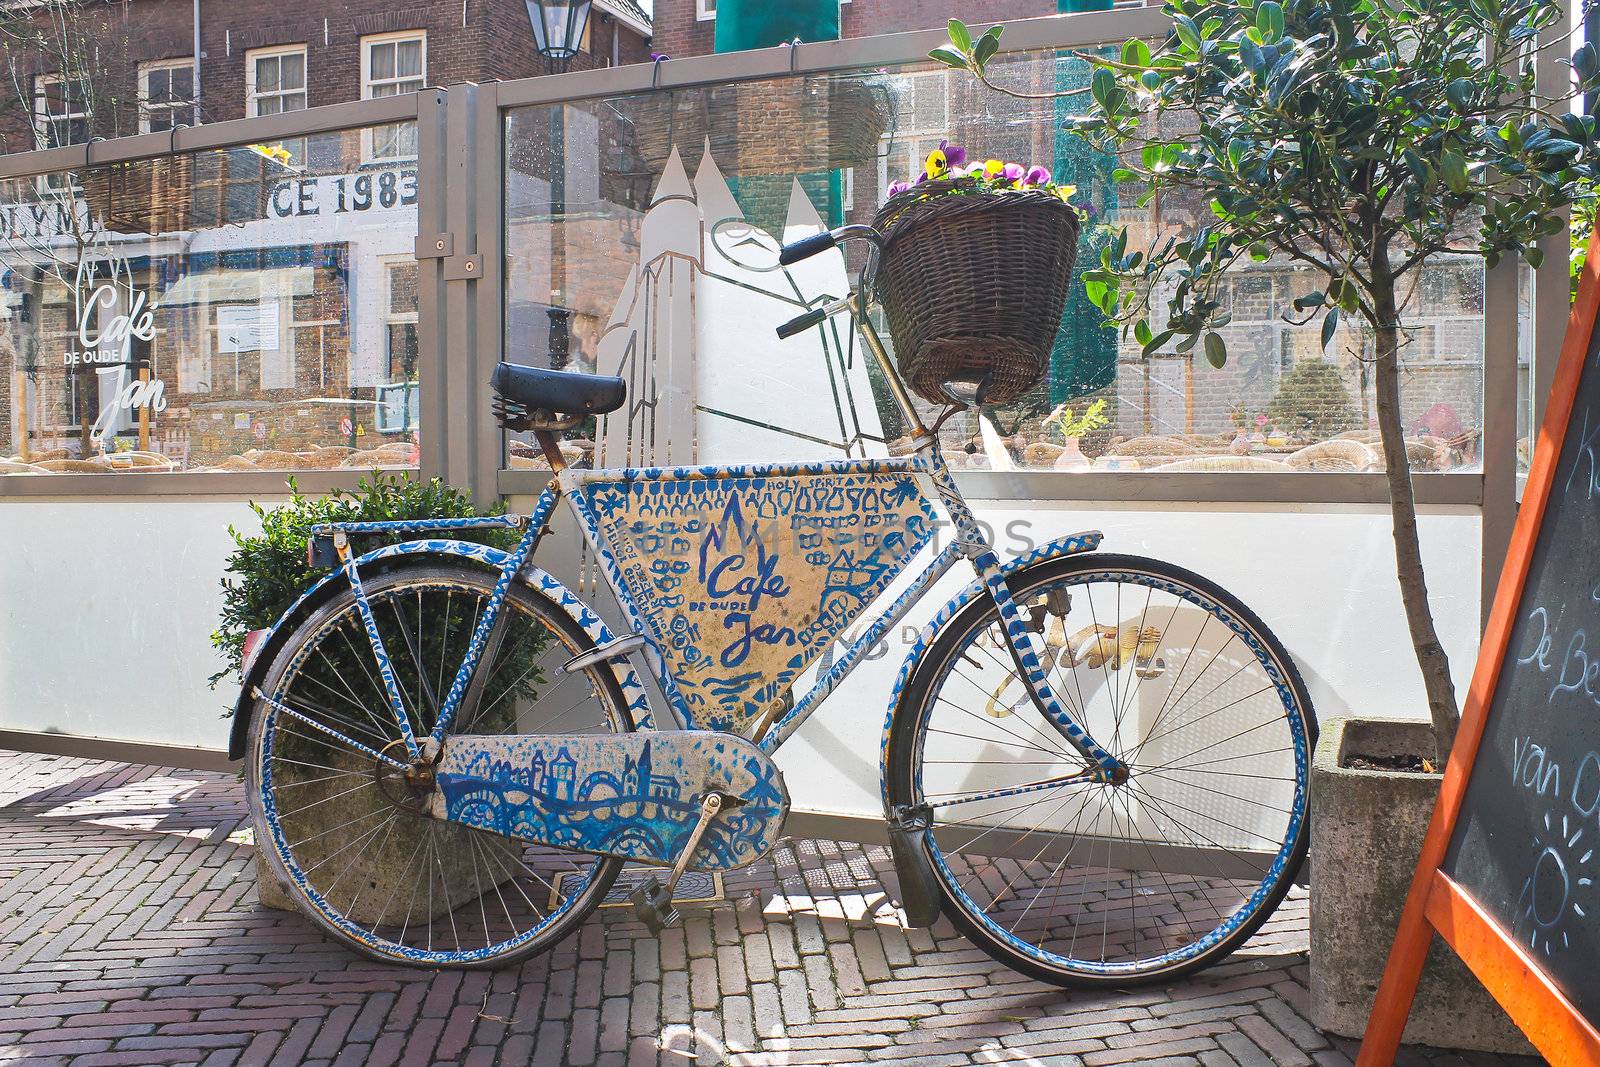 Bicycle advertising café in Delft,  Netherlands by NickNick